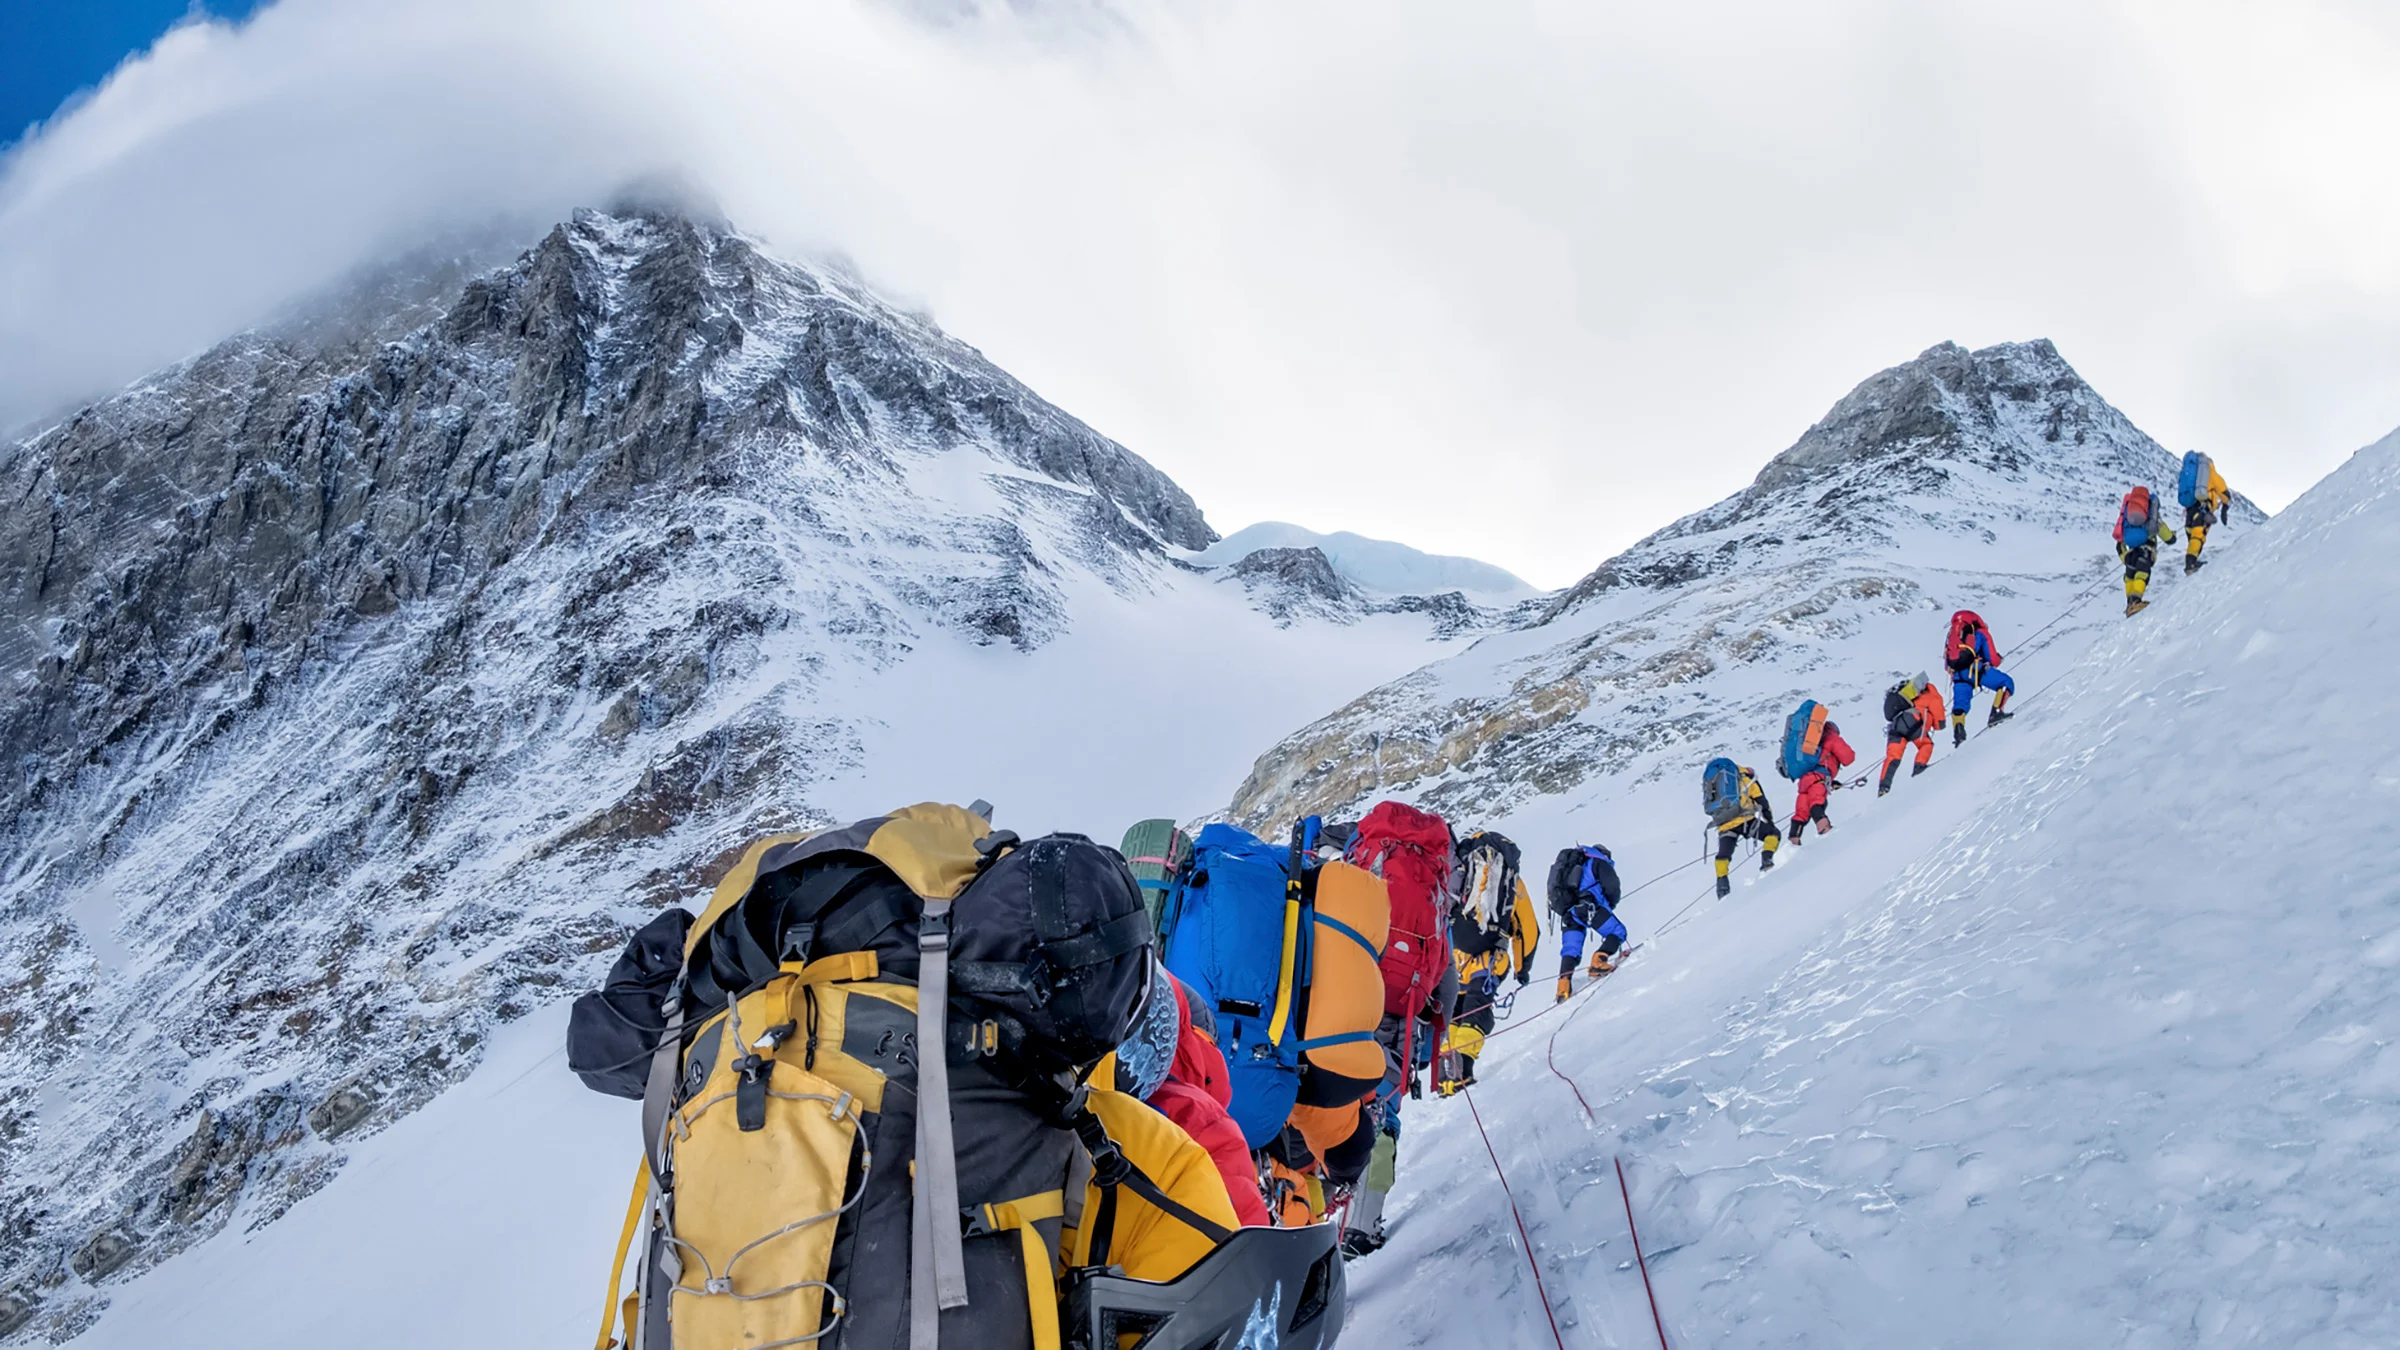 Over 400 foreign climbers set to ccale Mt. Everest this spring season